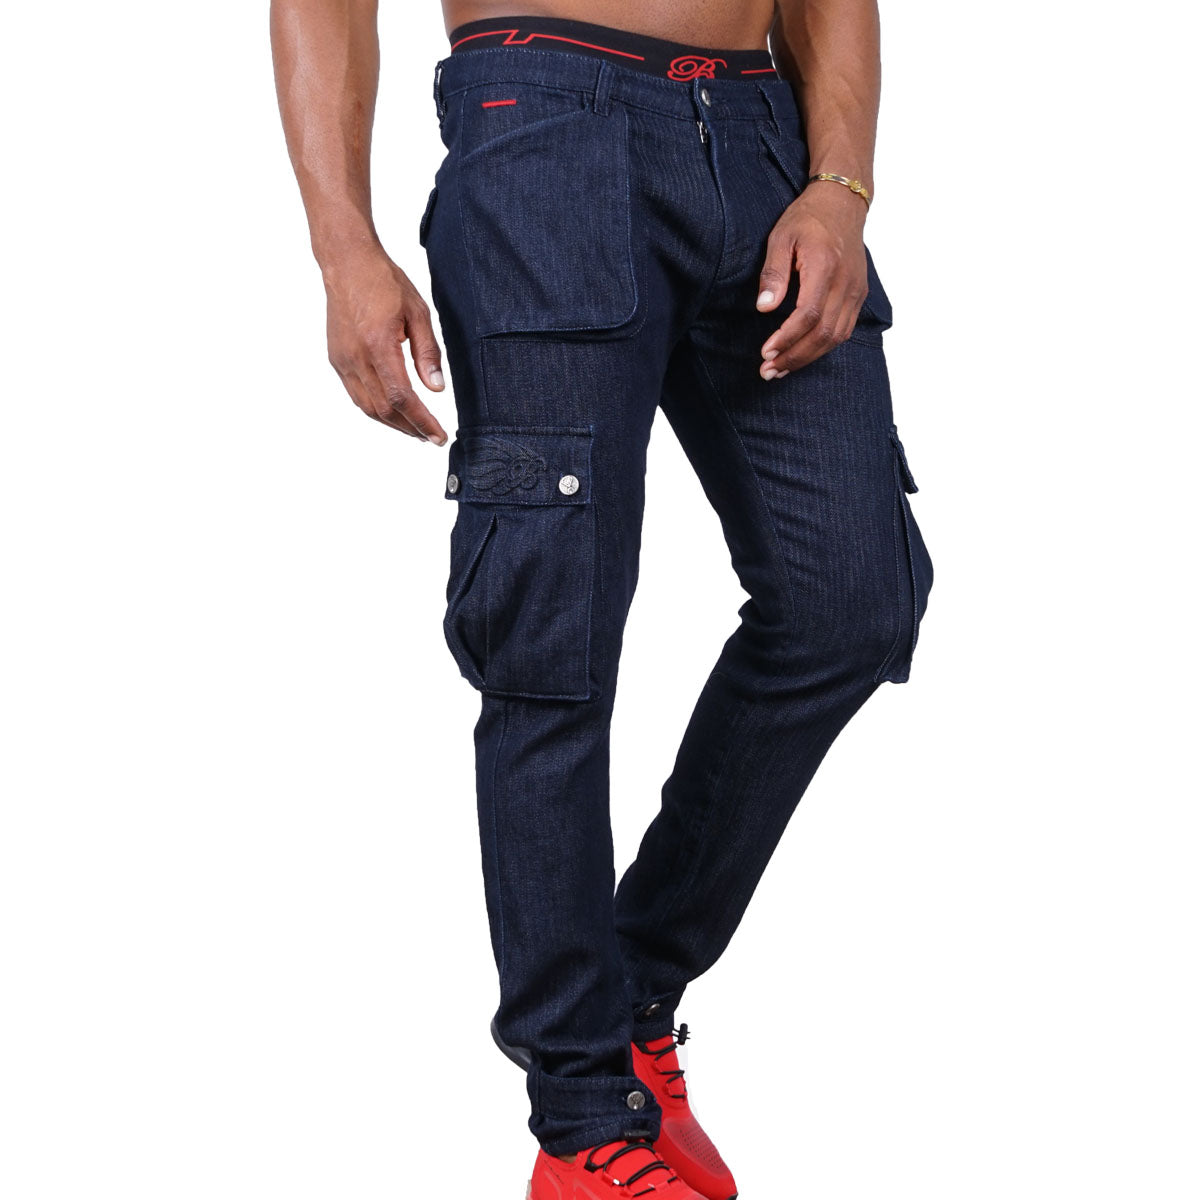 These blue cargo jeans are a perfect mixture between style and functionality